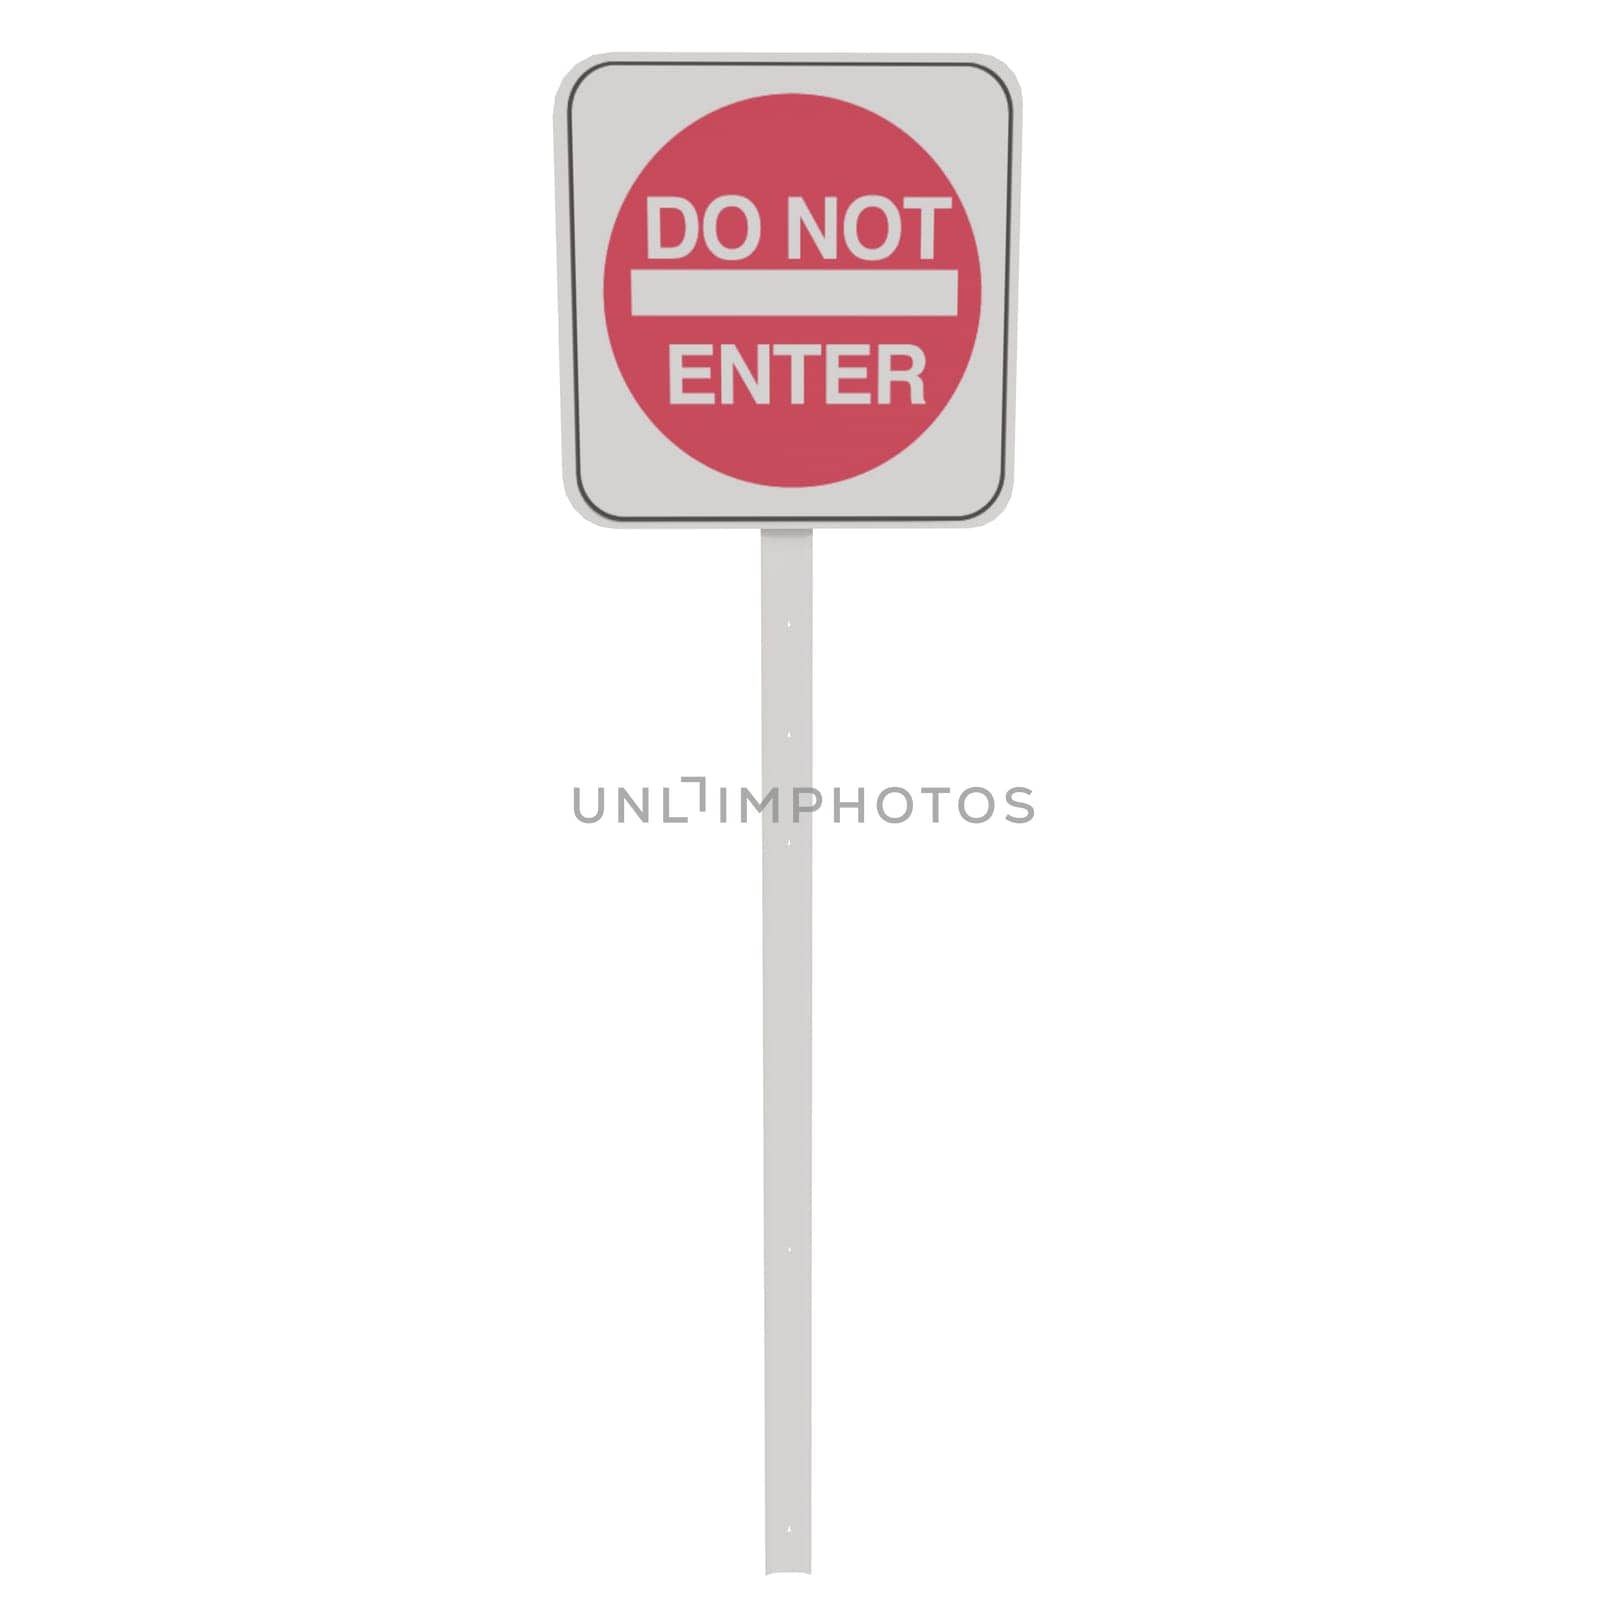 Do Not Enter Traffic Sign isolated on white background. High quality 3d illustration